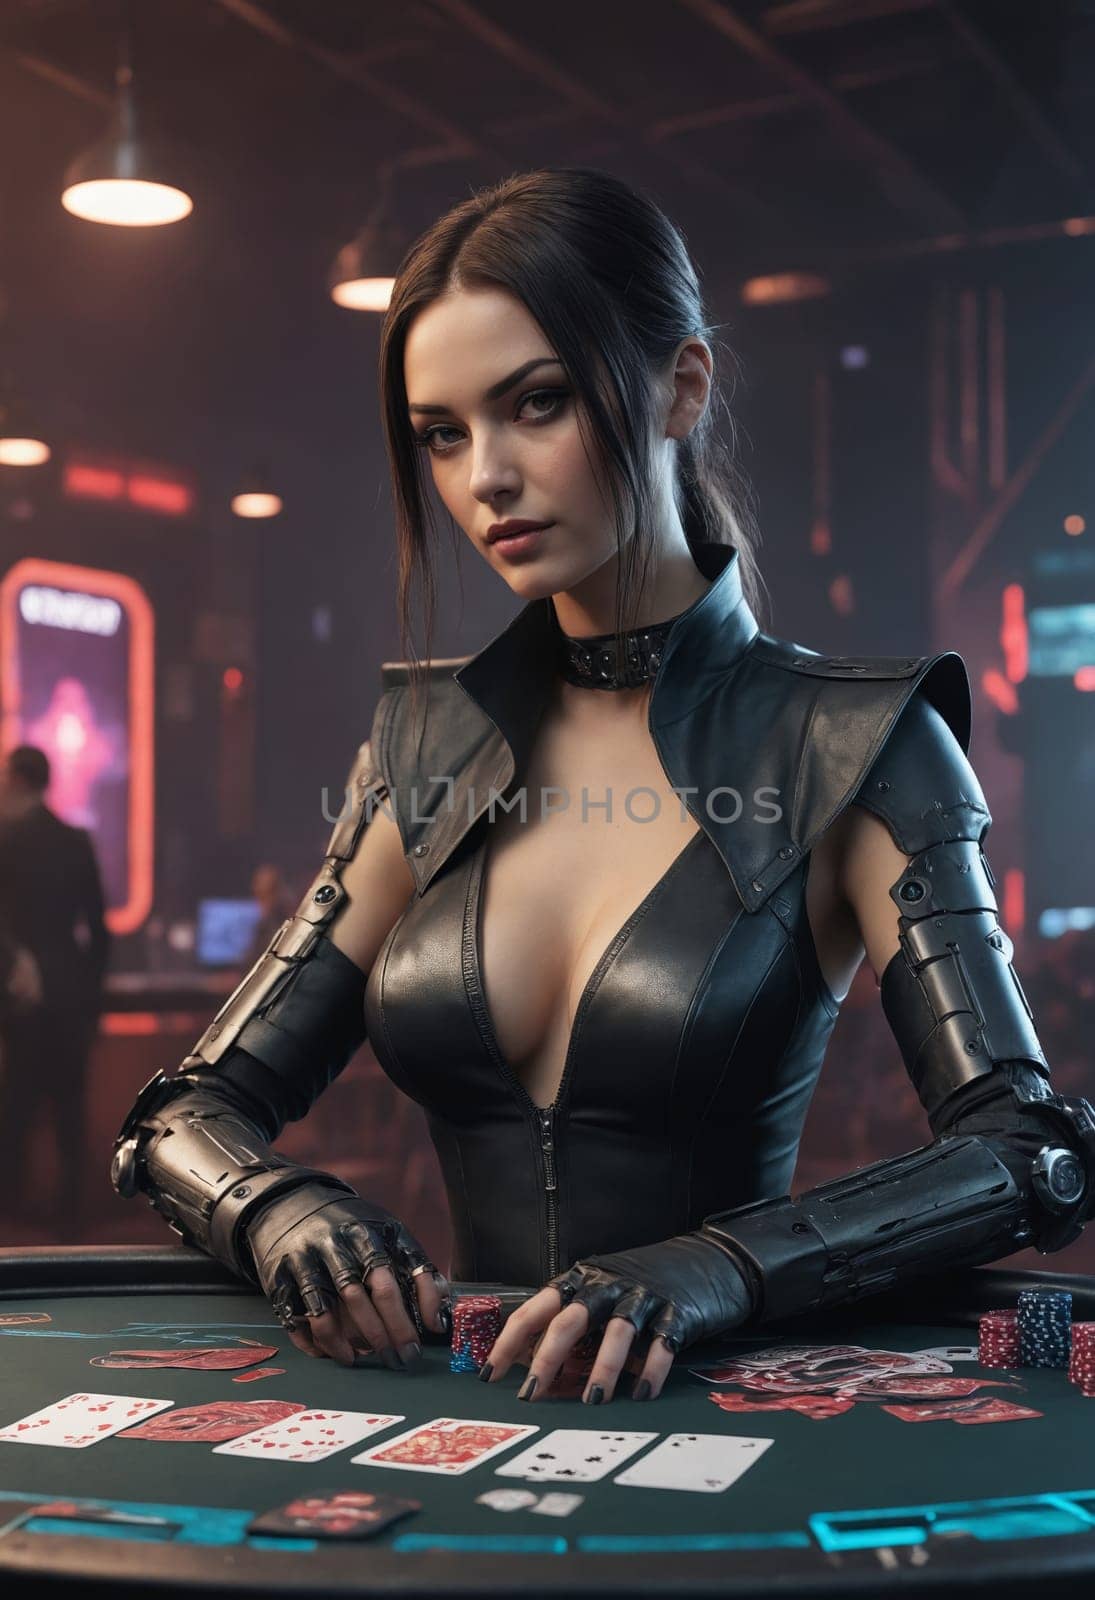 A woman in a black leather outfit sits at the poker table by Andre1ns